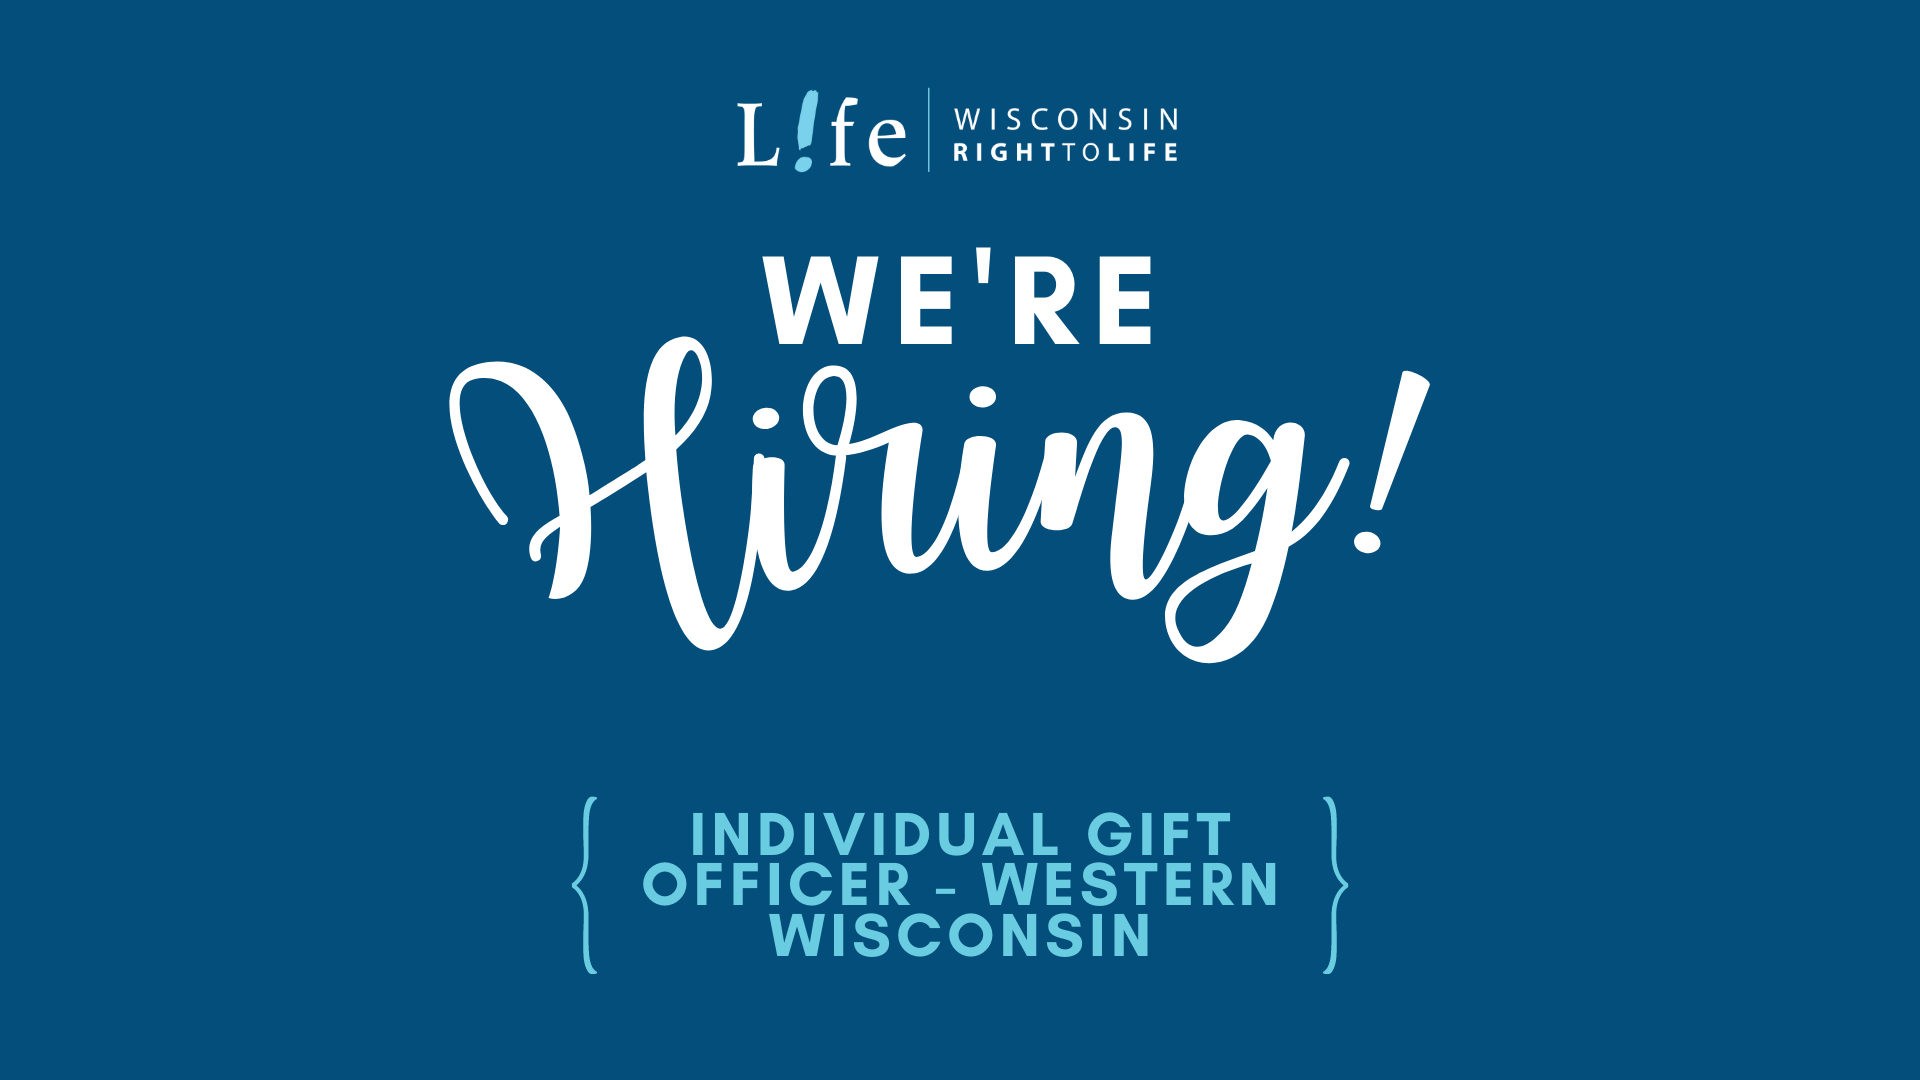 Join the Wisconsin Right to Life team!